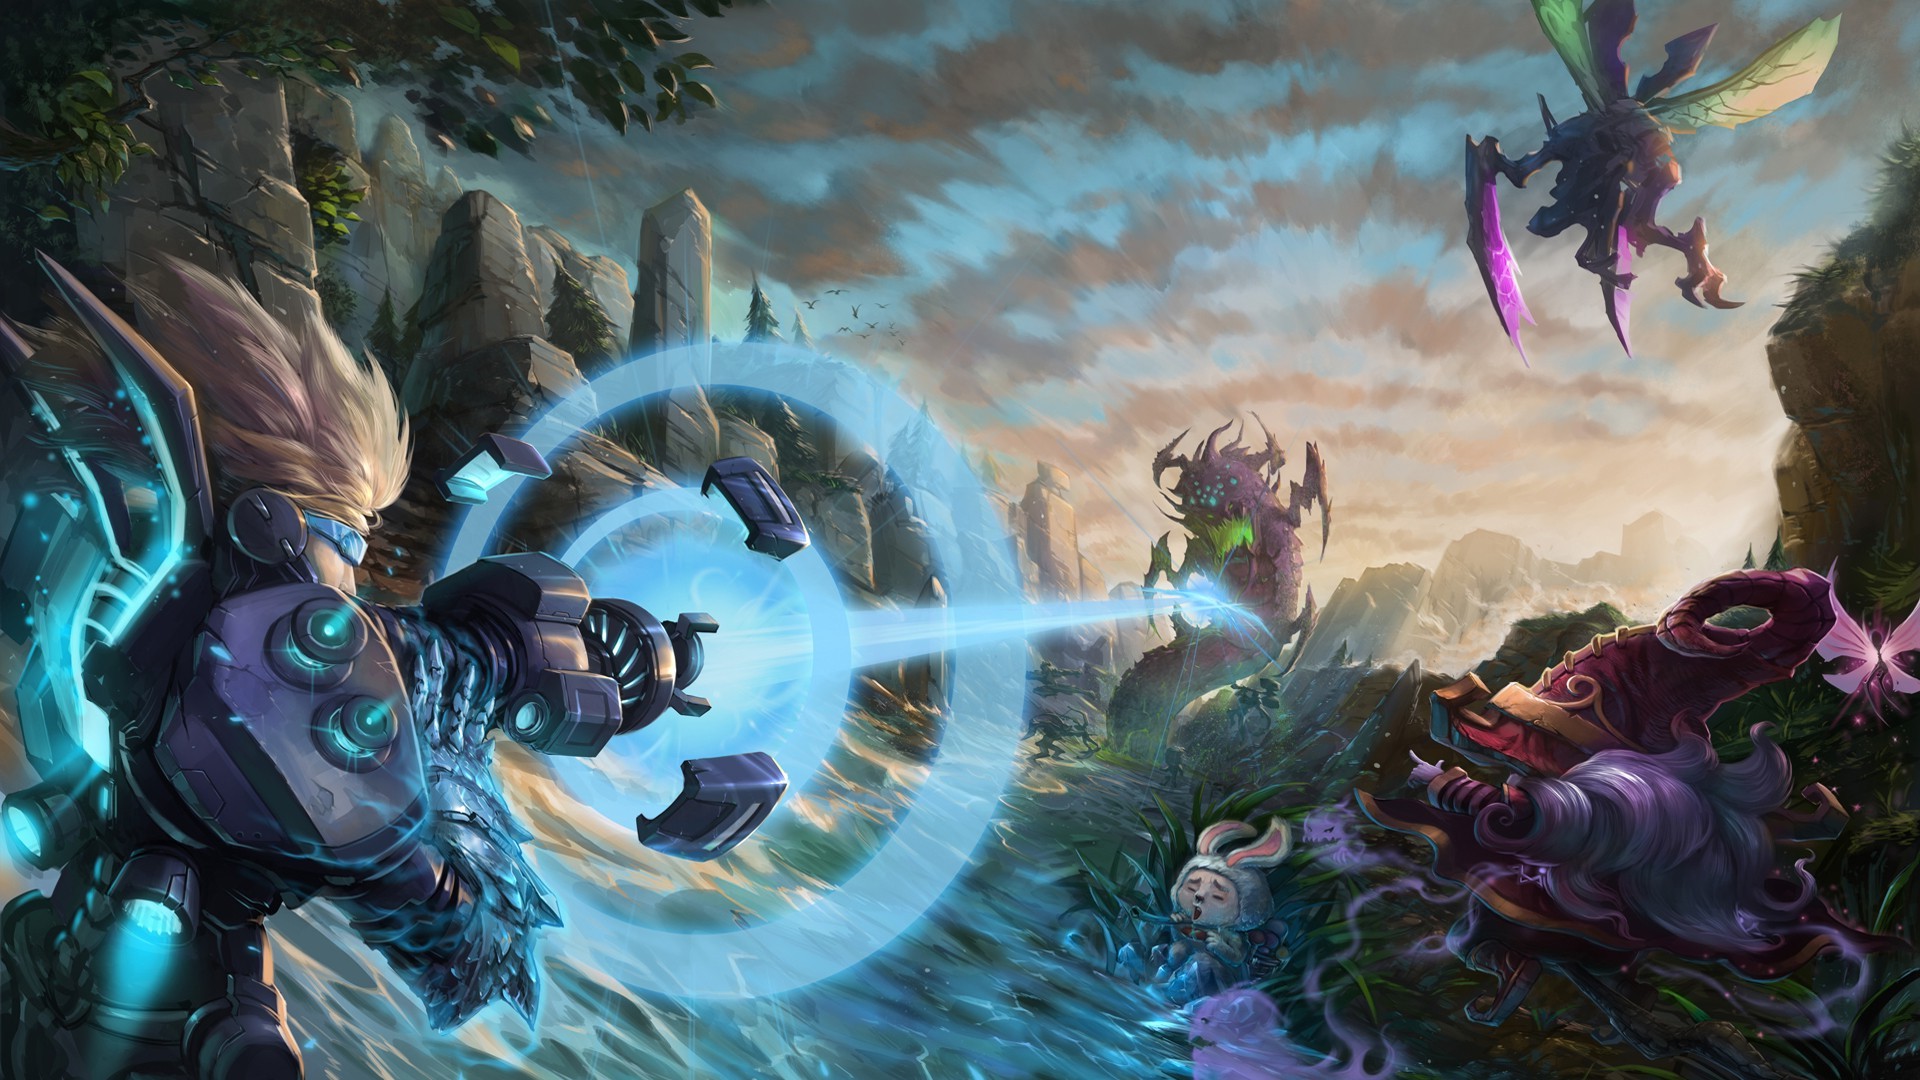 league of legends hd wallpapers 1920x1080,action adventure game,cg artwork,mythology,fictional character,painting